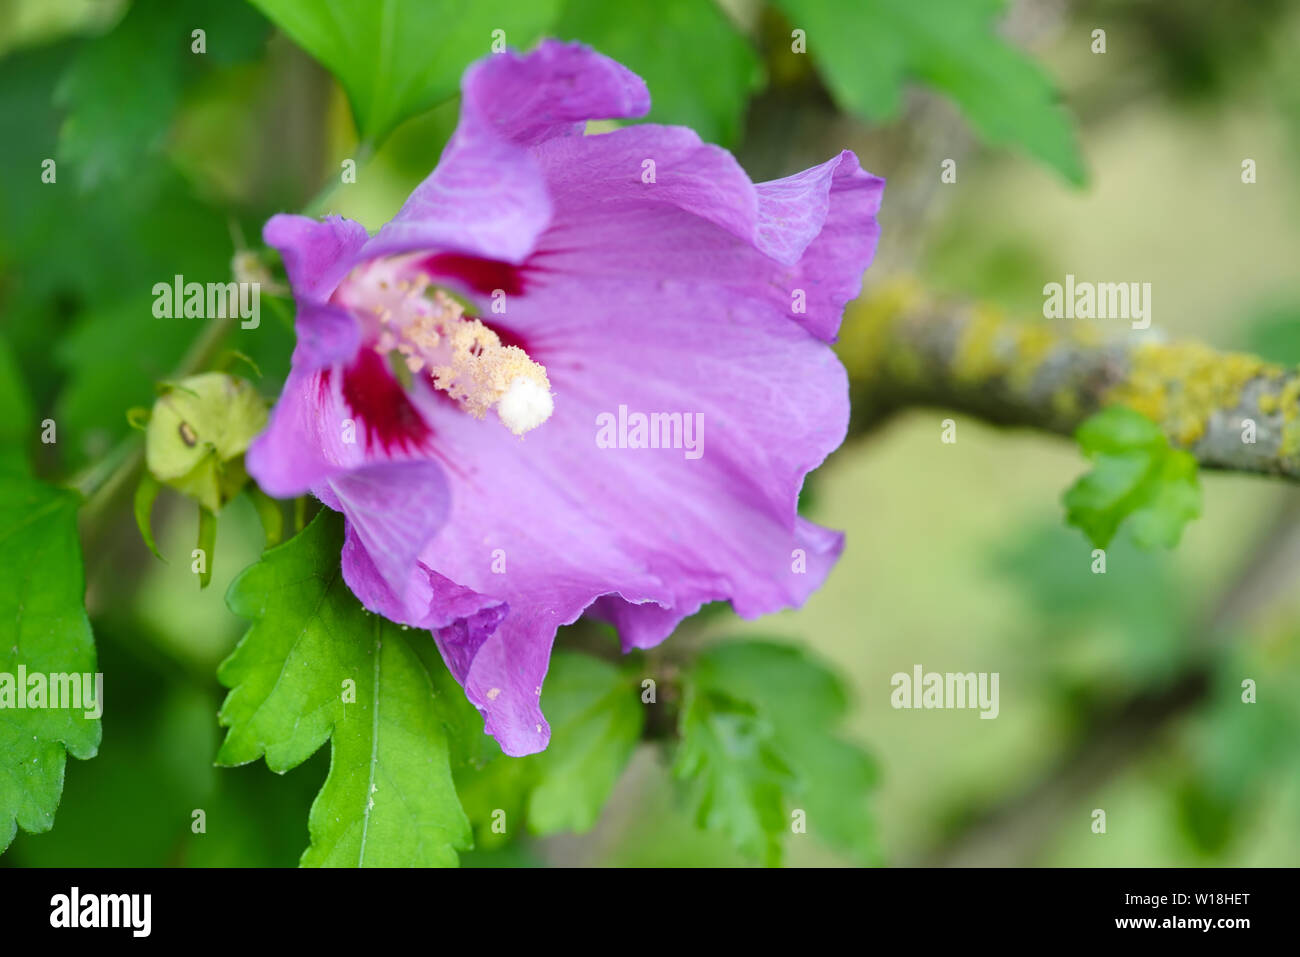 The close-up purple hibiscus flower Stock Photo